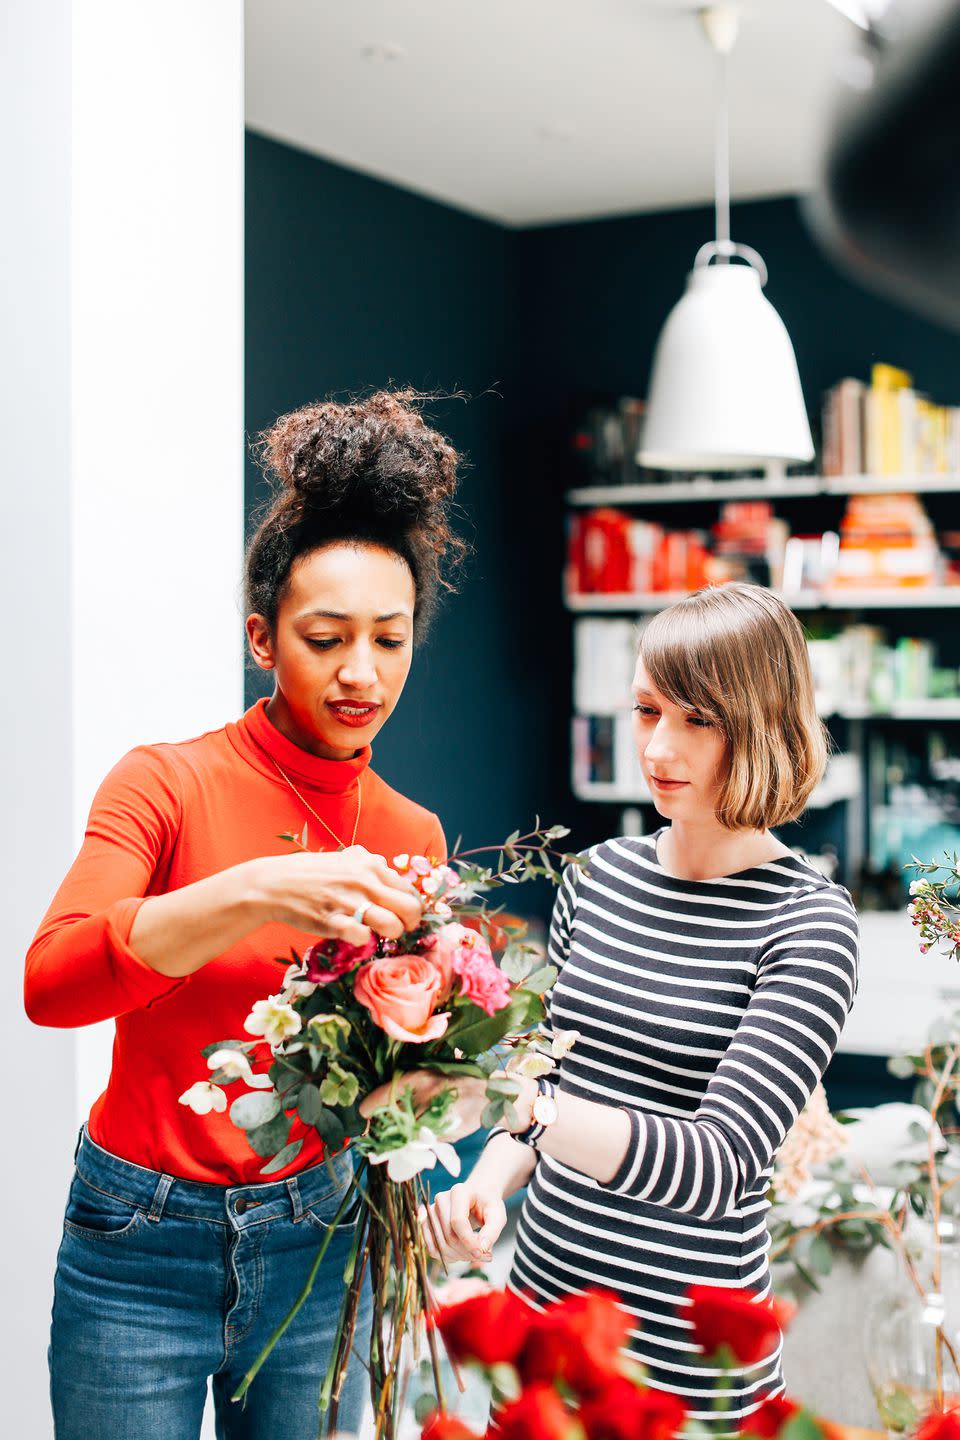 Take a floral arranging class.